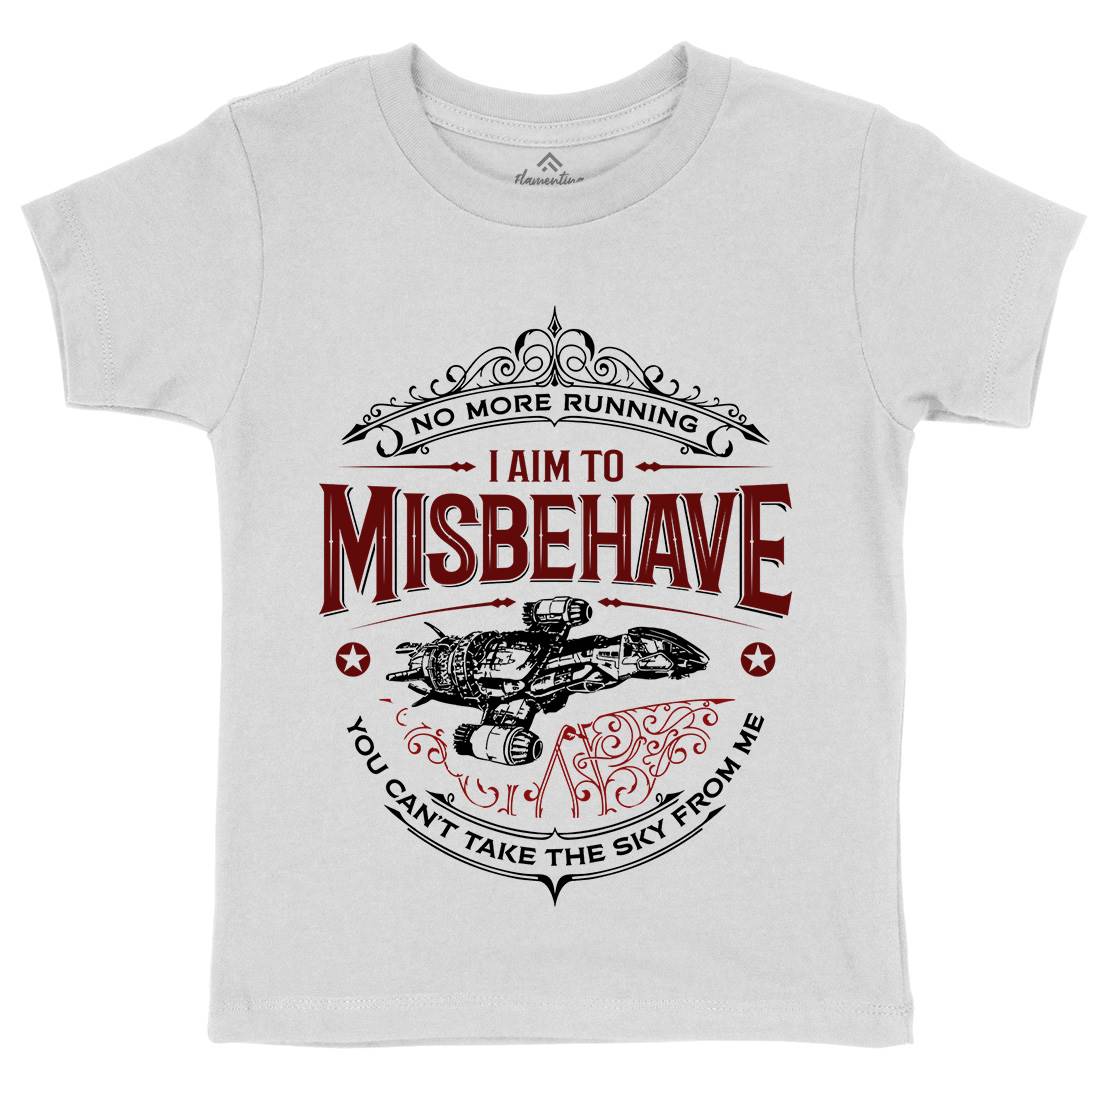 I Aim To Misbehave Kids Crew Neck T-Shirt Space D435